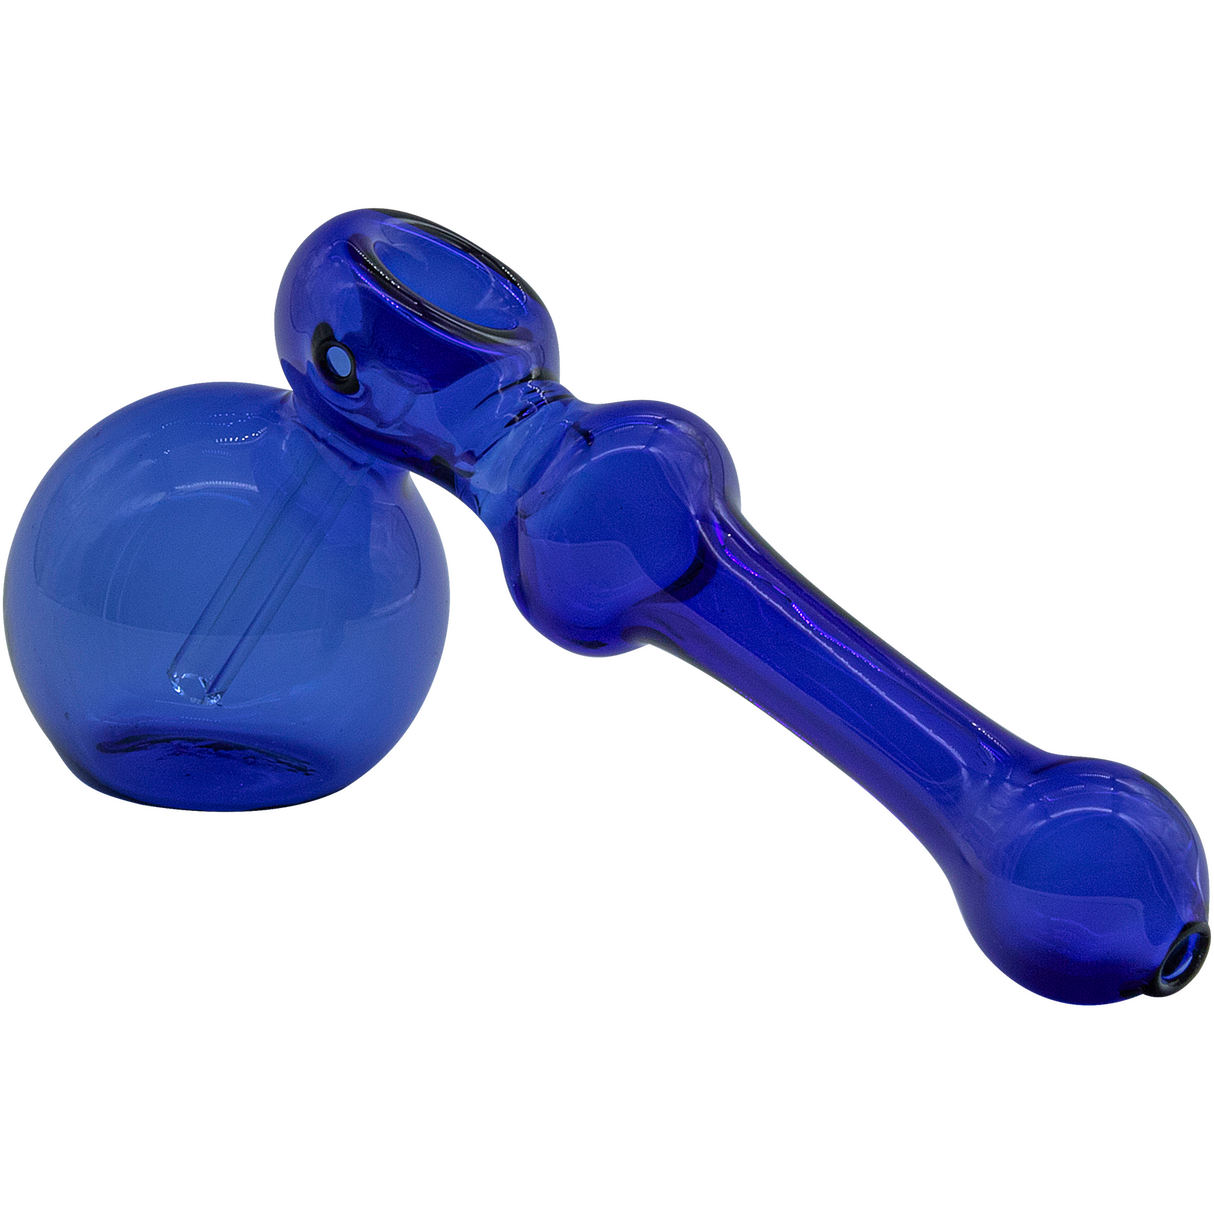 LA Pipes "Glass Hammer" Bubbler Pipe in blue, 6" borosilicate glass, side view on white background